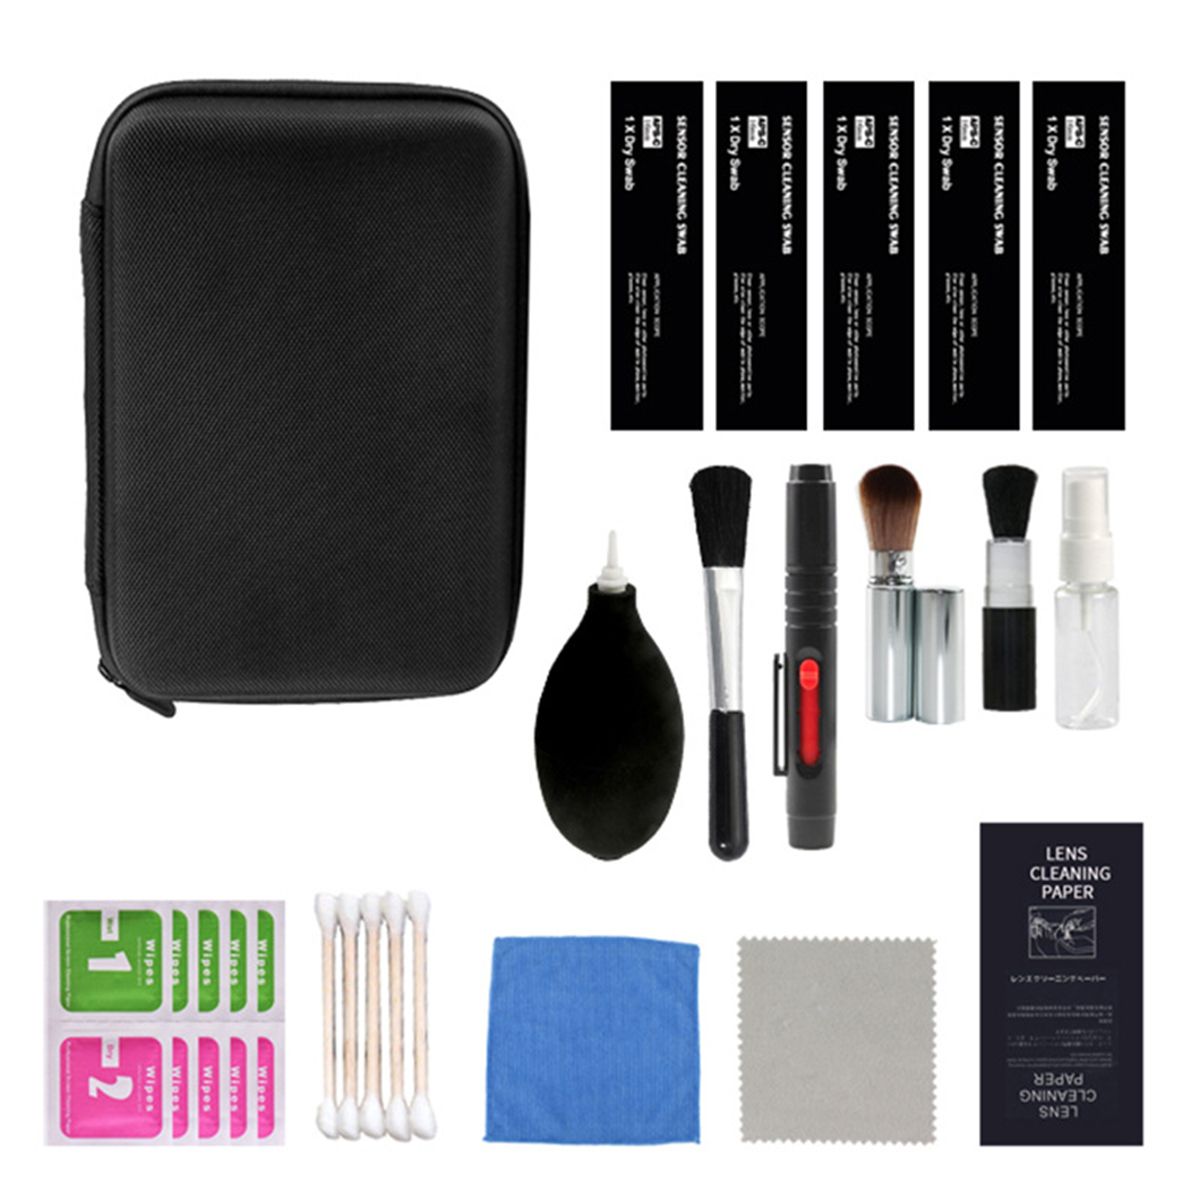 16PCSSet-Professional-Camera-Cleaning-Brush-Kit-For-Camera-Lens-Screen-Mobile-Phones-1564970